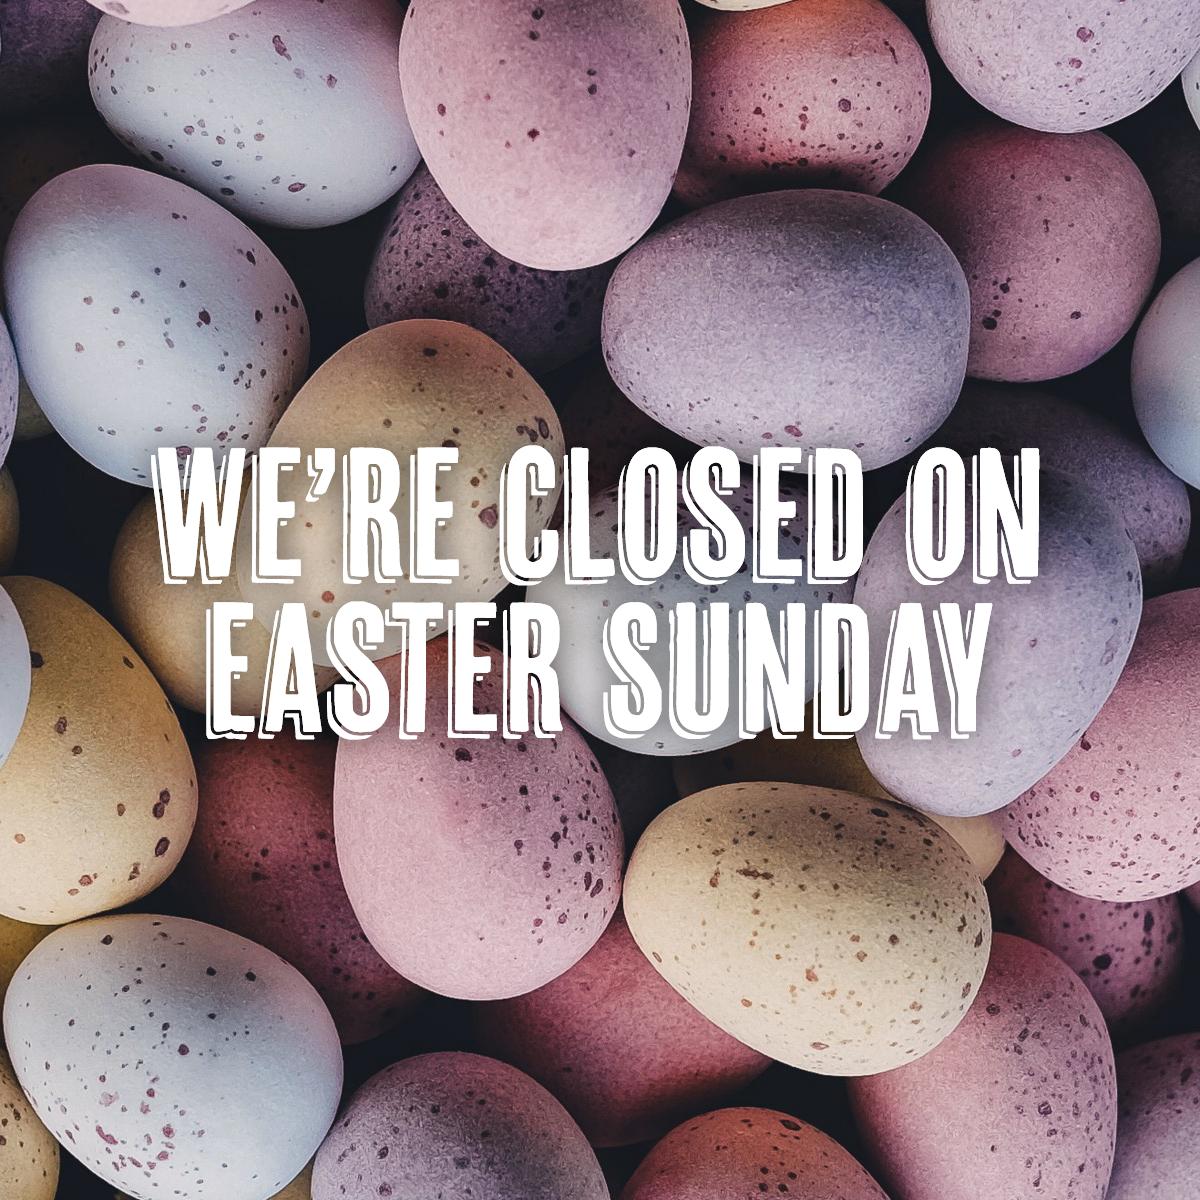 Closed on Easter Sunday